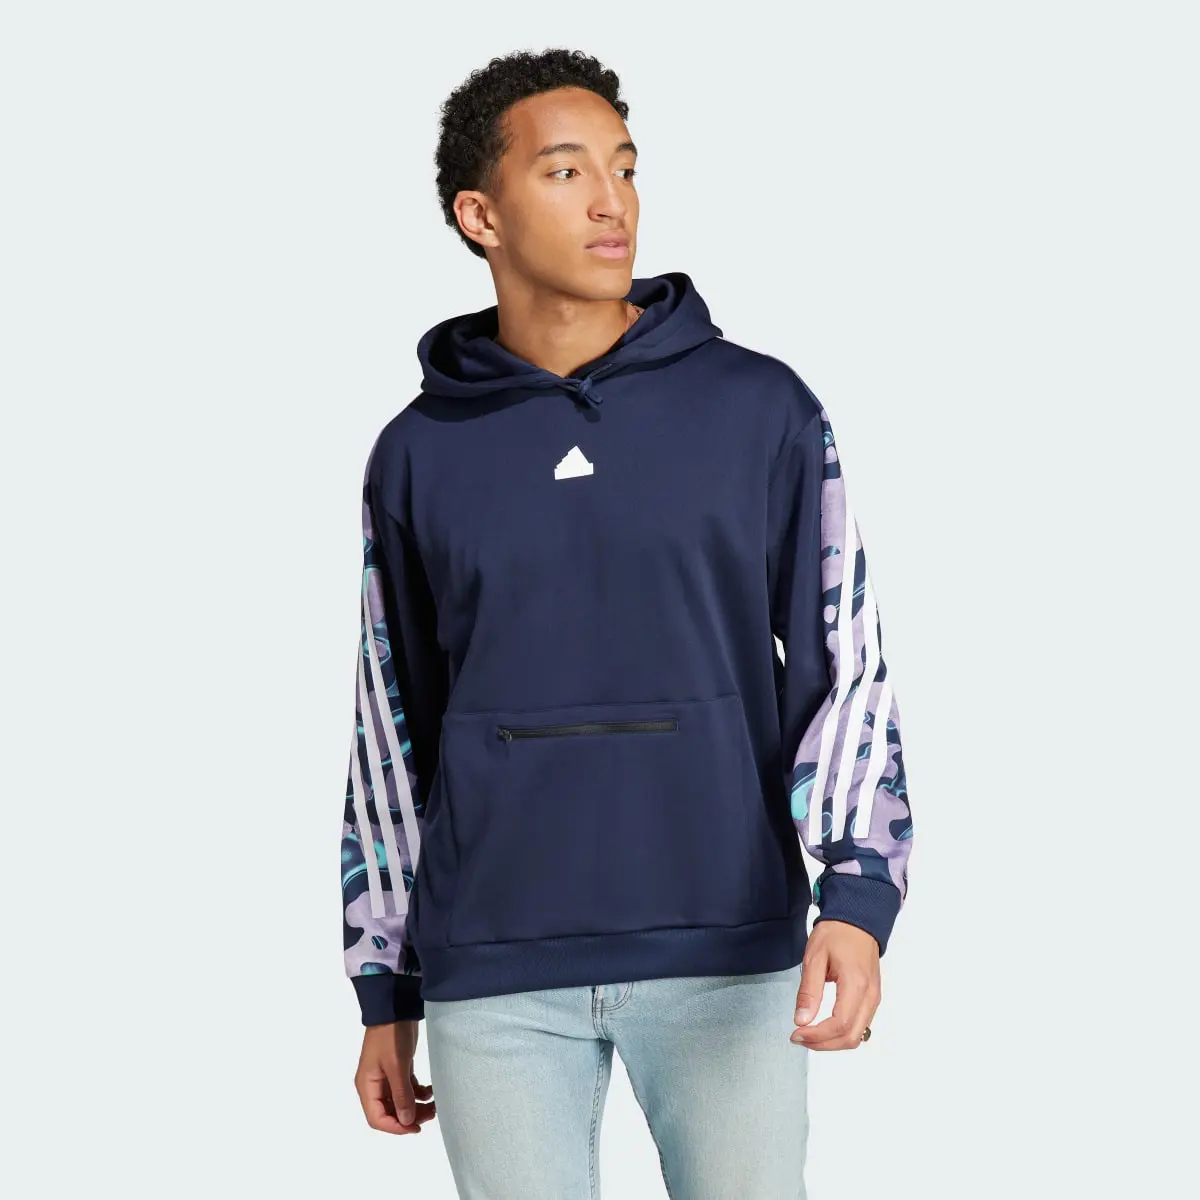 Adidas Future Icons Allover Print Hoodie. 2